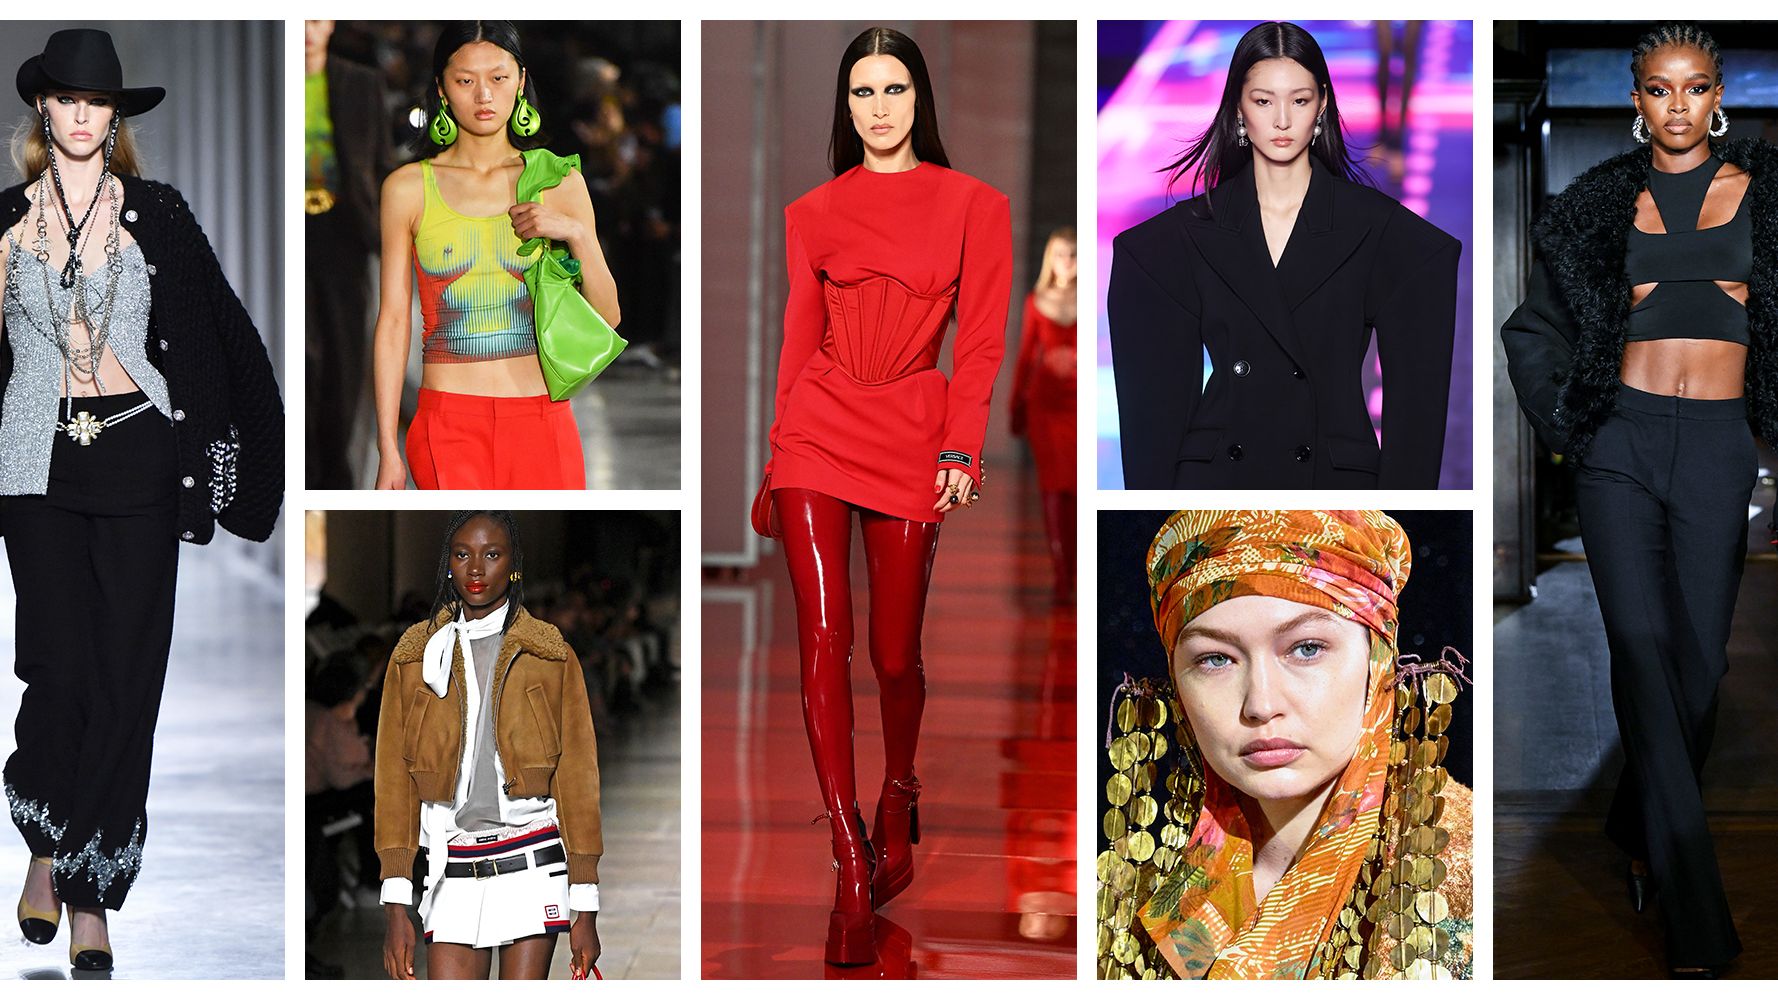 Prepping for Winter? Here Are The 10 Fashion Trends You Need to Know (and Shop) Now